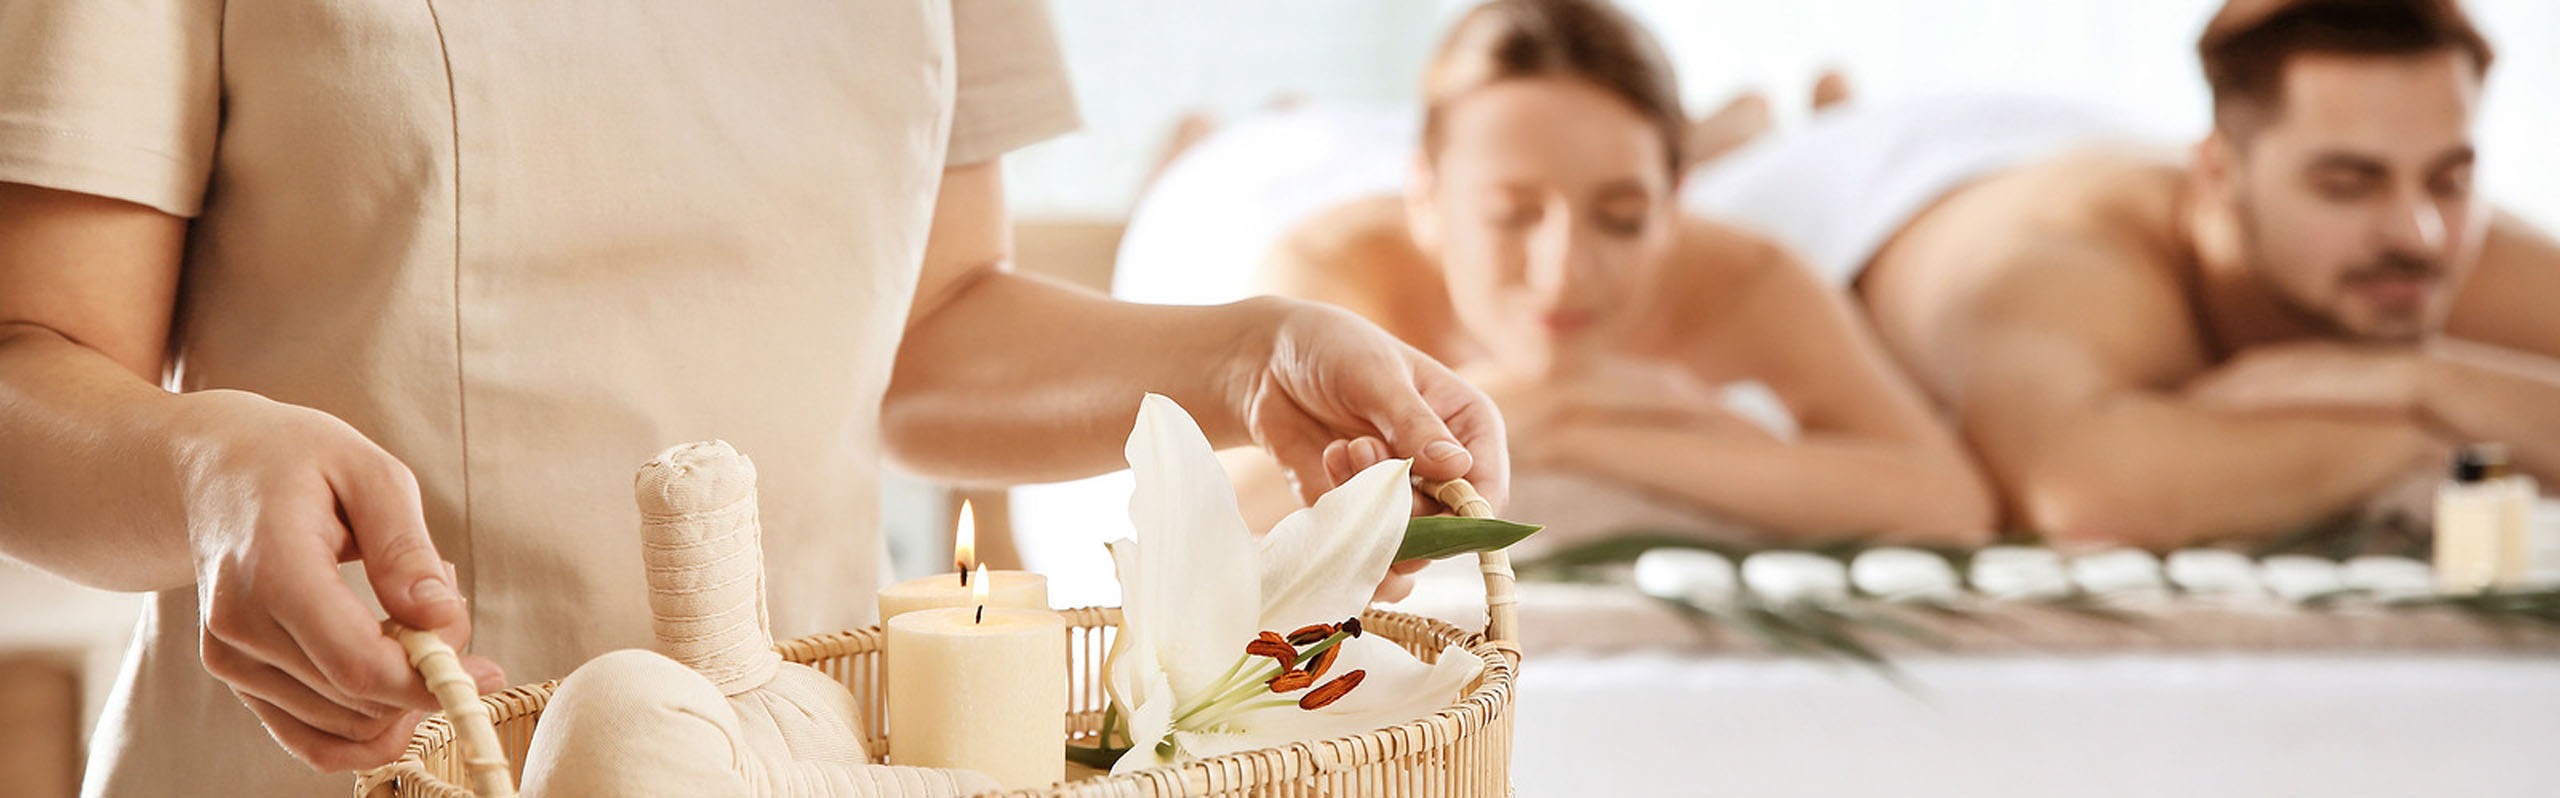 Thai Massage vs Swedish Massage: Which Is Better for You? 